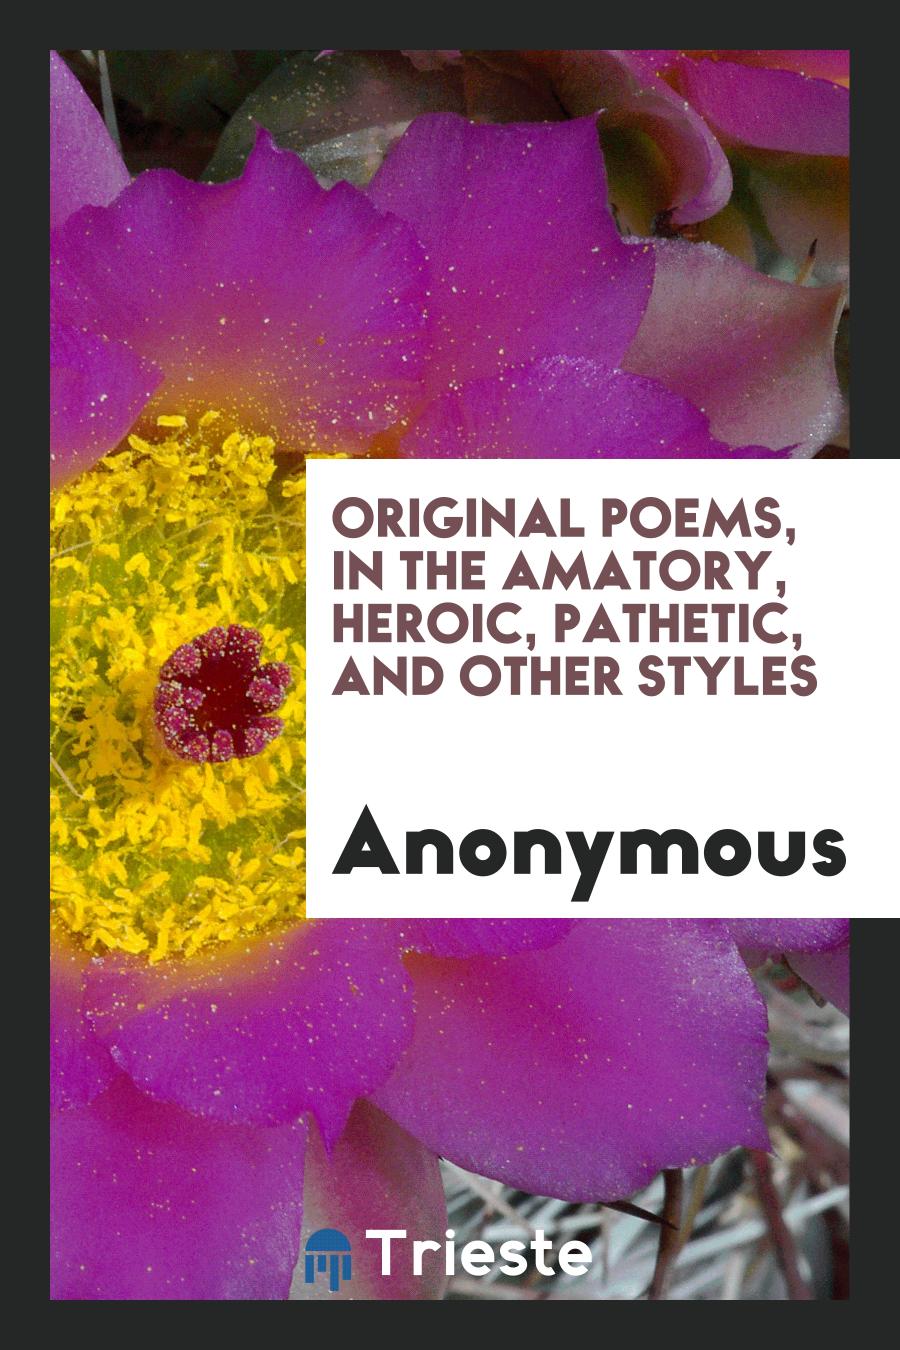 Original poems, in the amatory, heroic, pathetic, and other styles